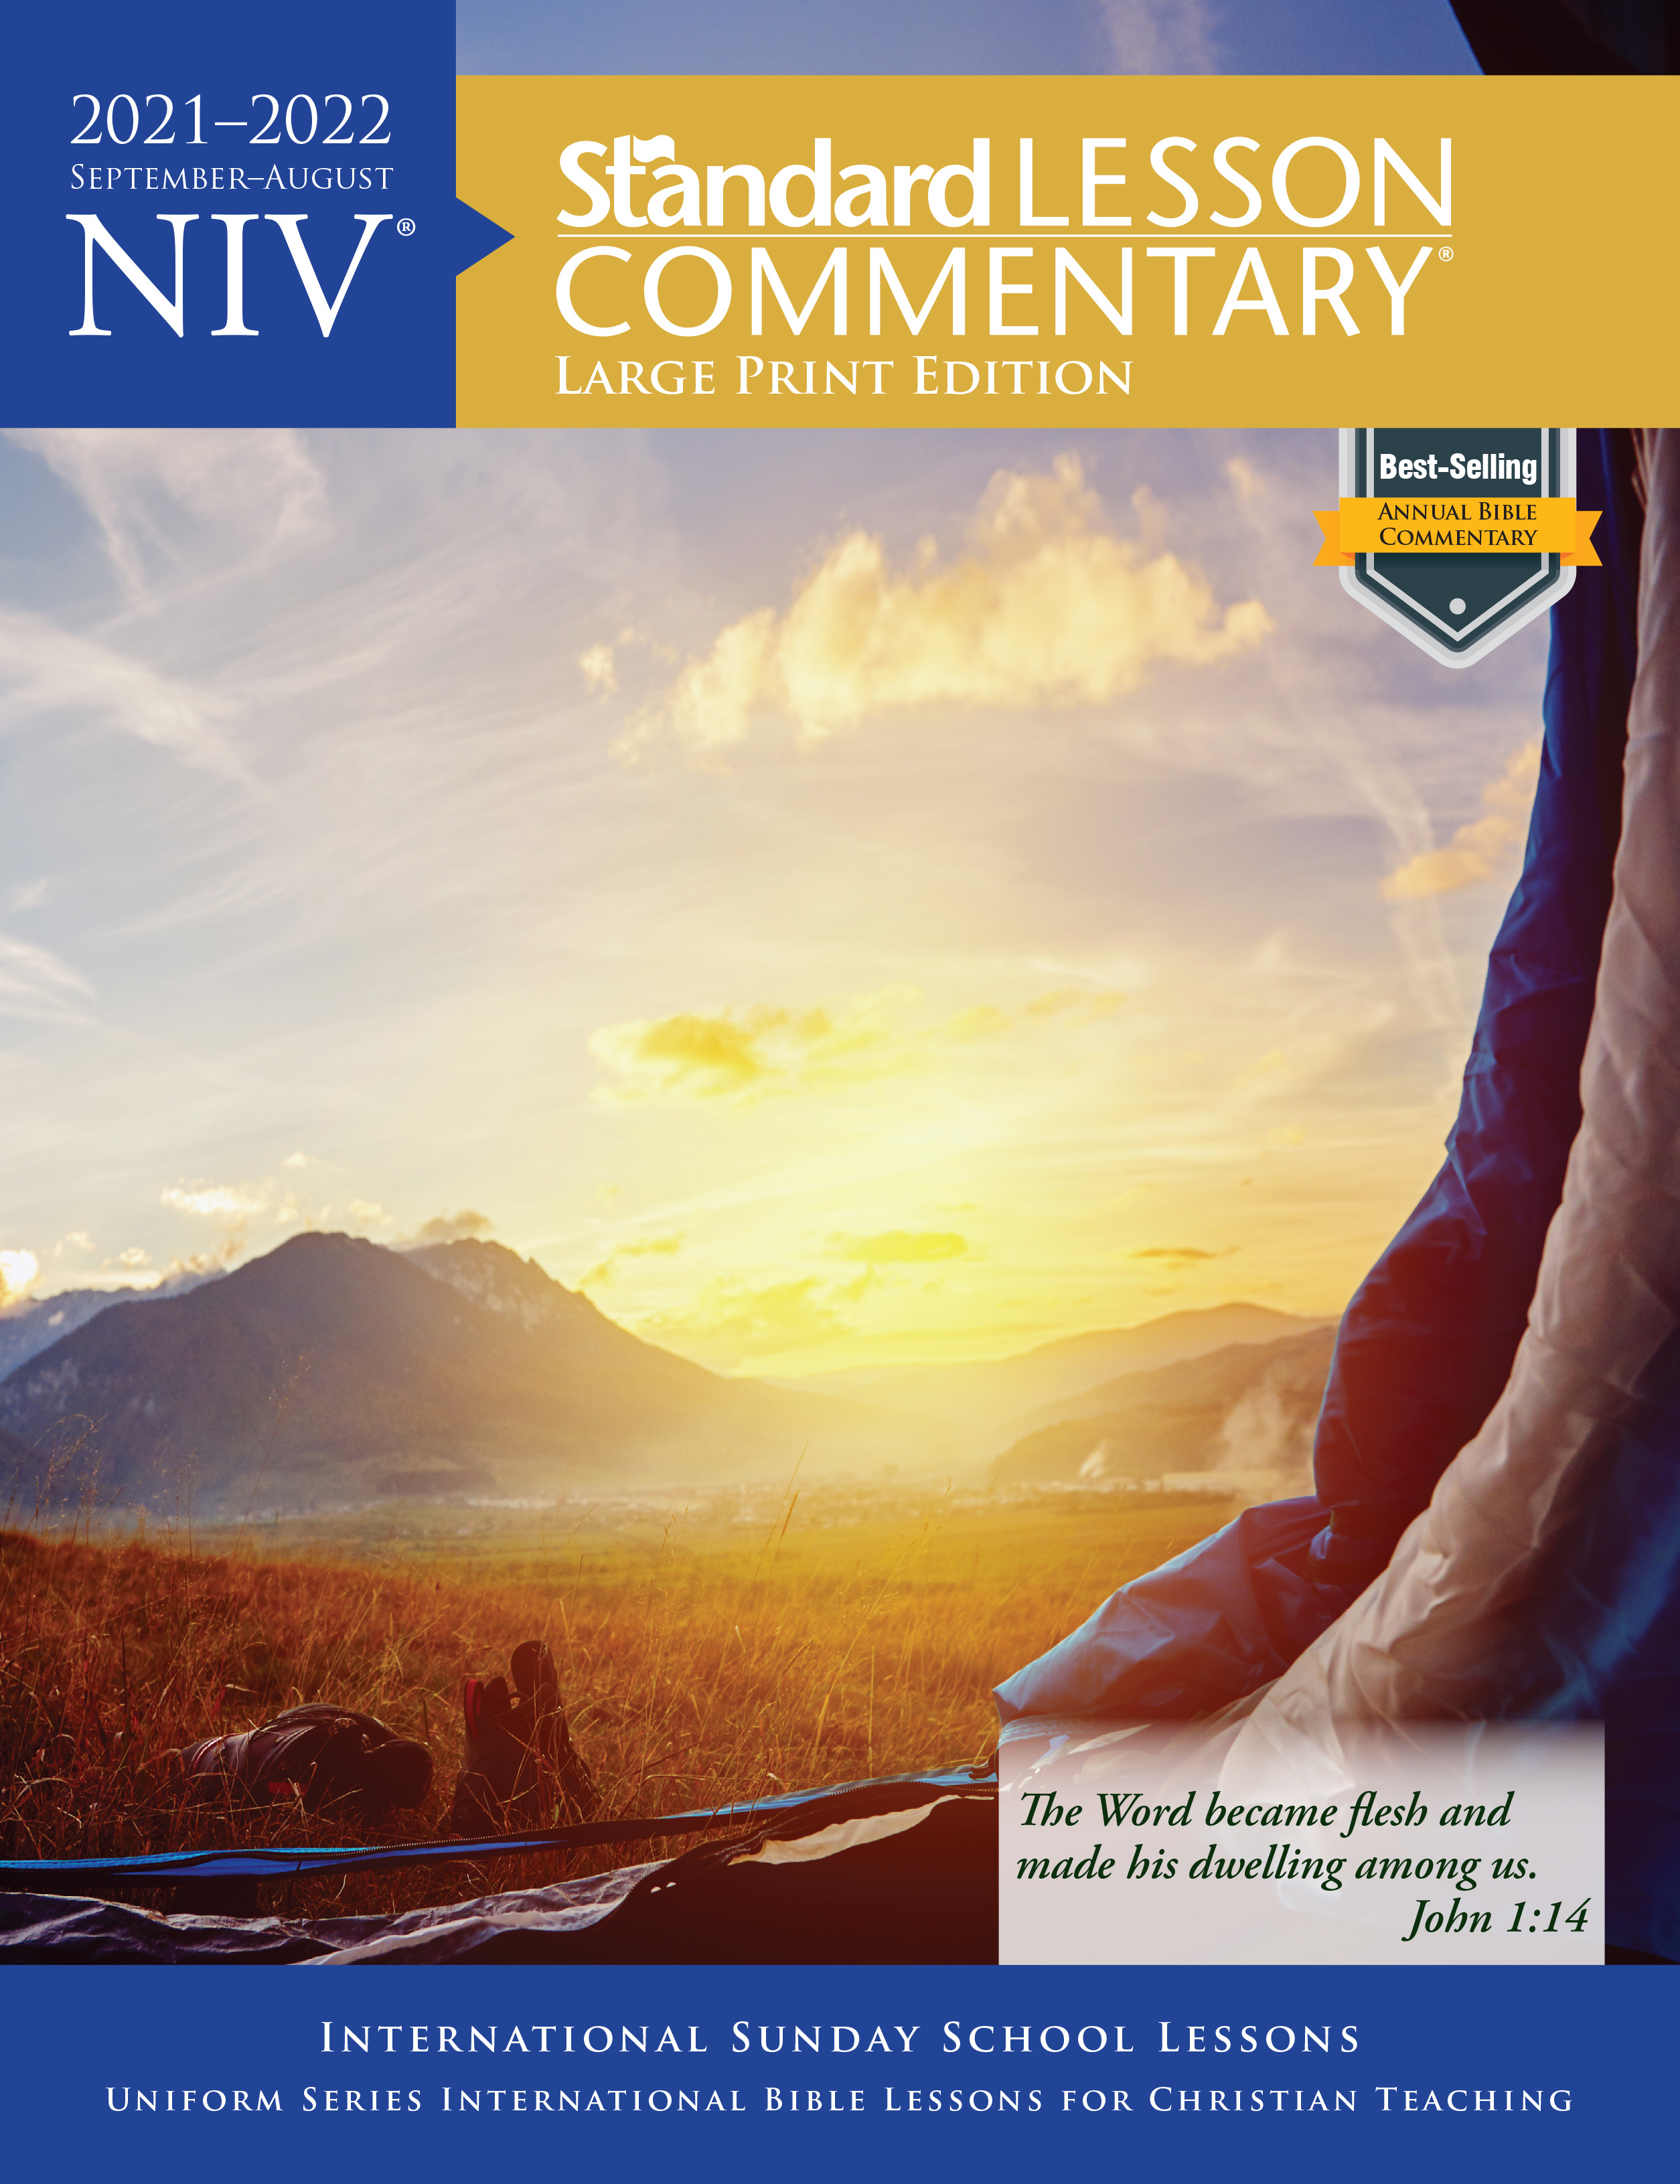 NIV® Standard Lesson Commentary® Large Print Edition 20212022 Free